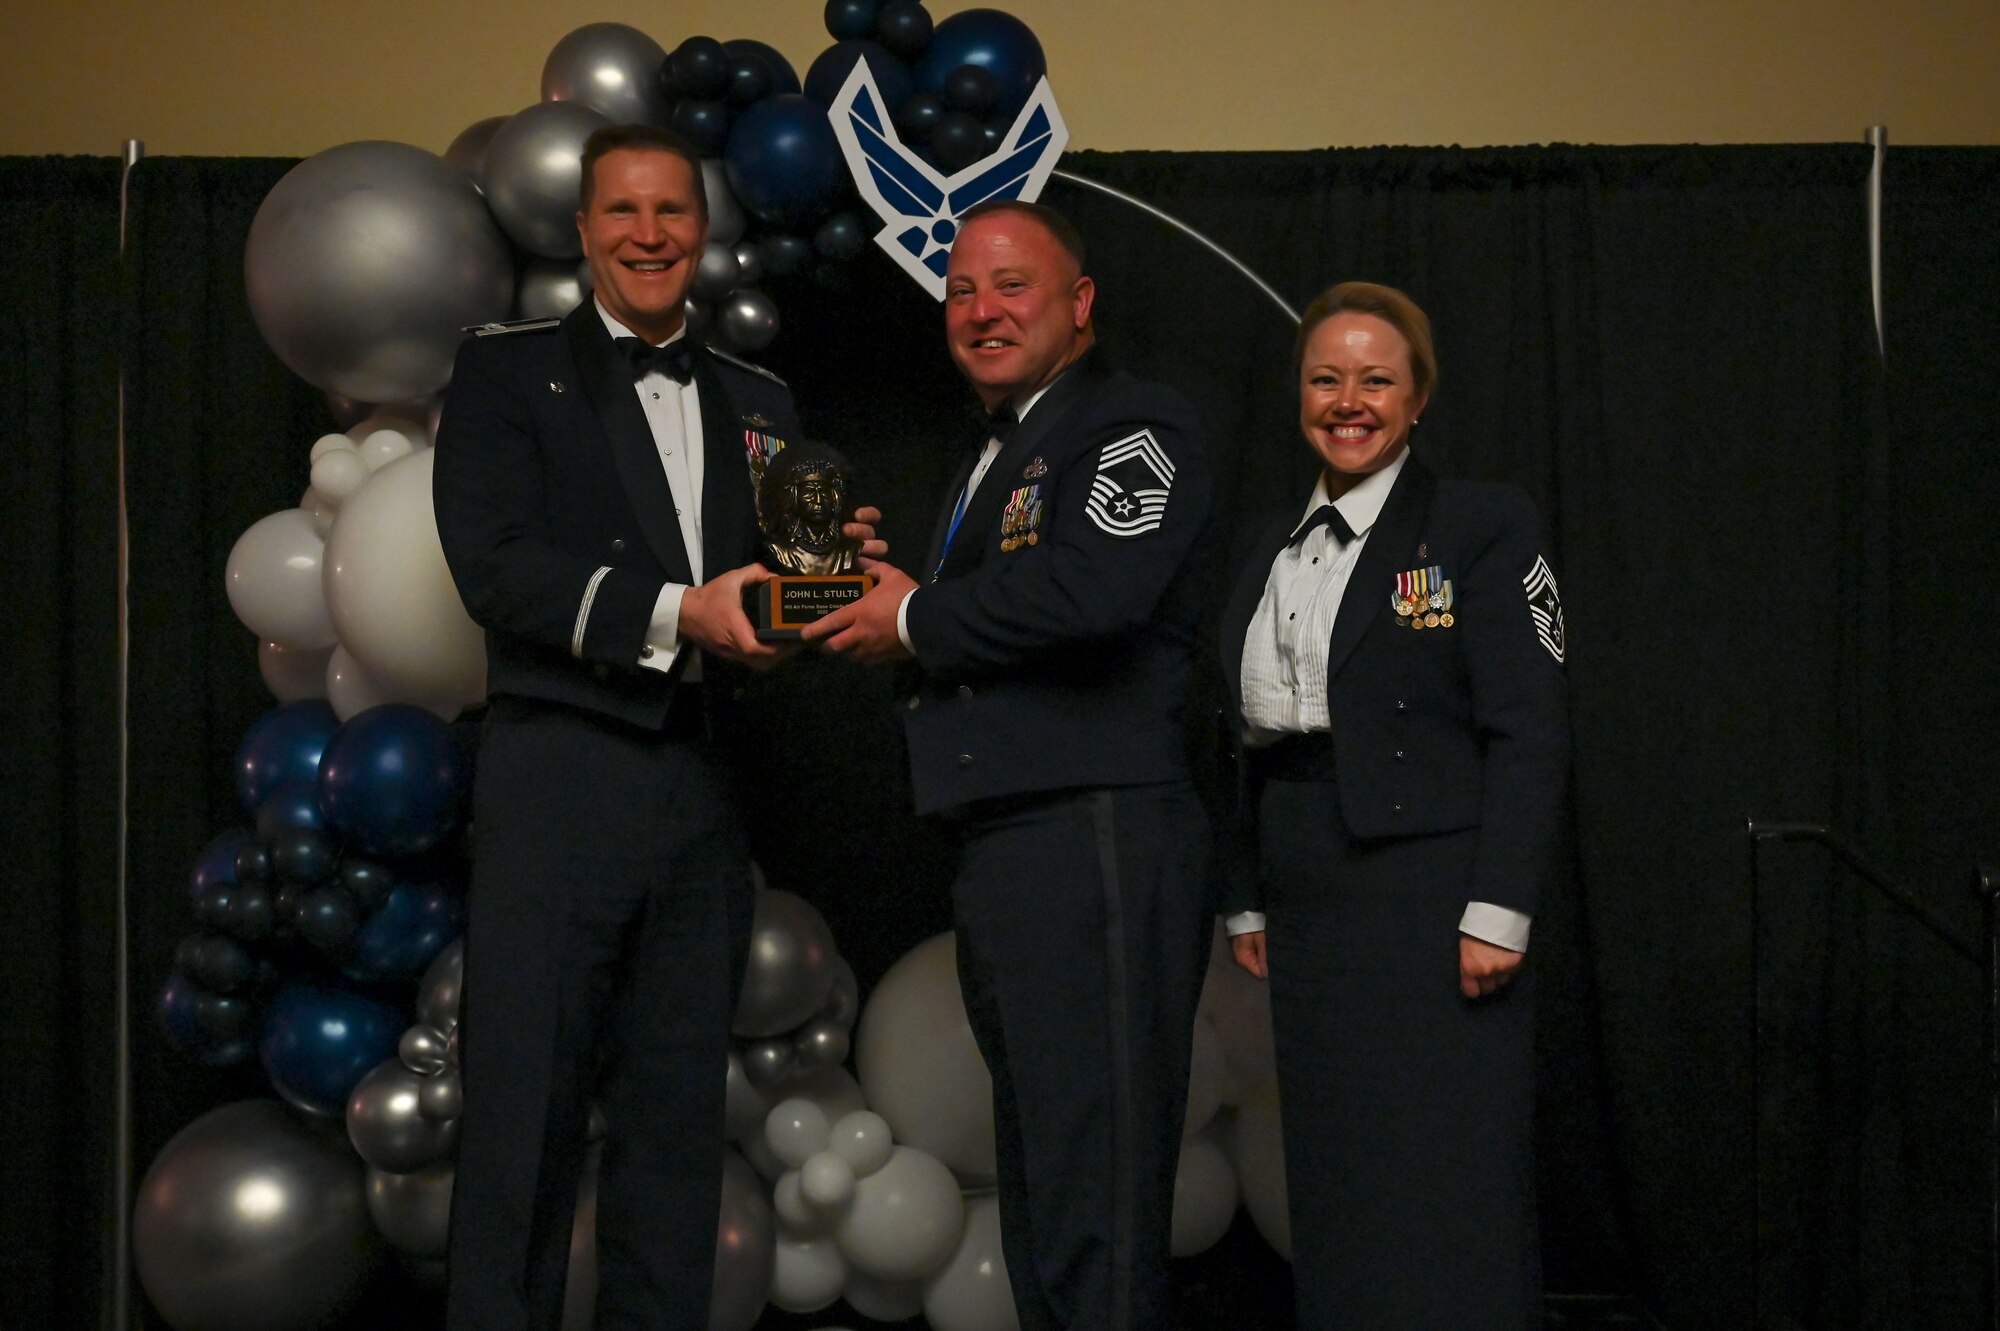 Chief Master Sgt. John Stults (center), 419th Maintenance Squadron, poses with Col. Matthew Fritz (left), 419th Fighter Wing commander, and Chief Master Sgt. Heather Richins, 419th FW command chief